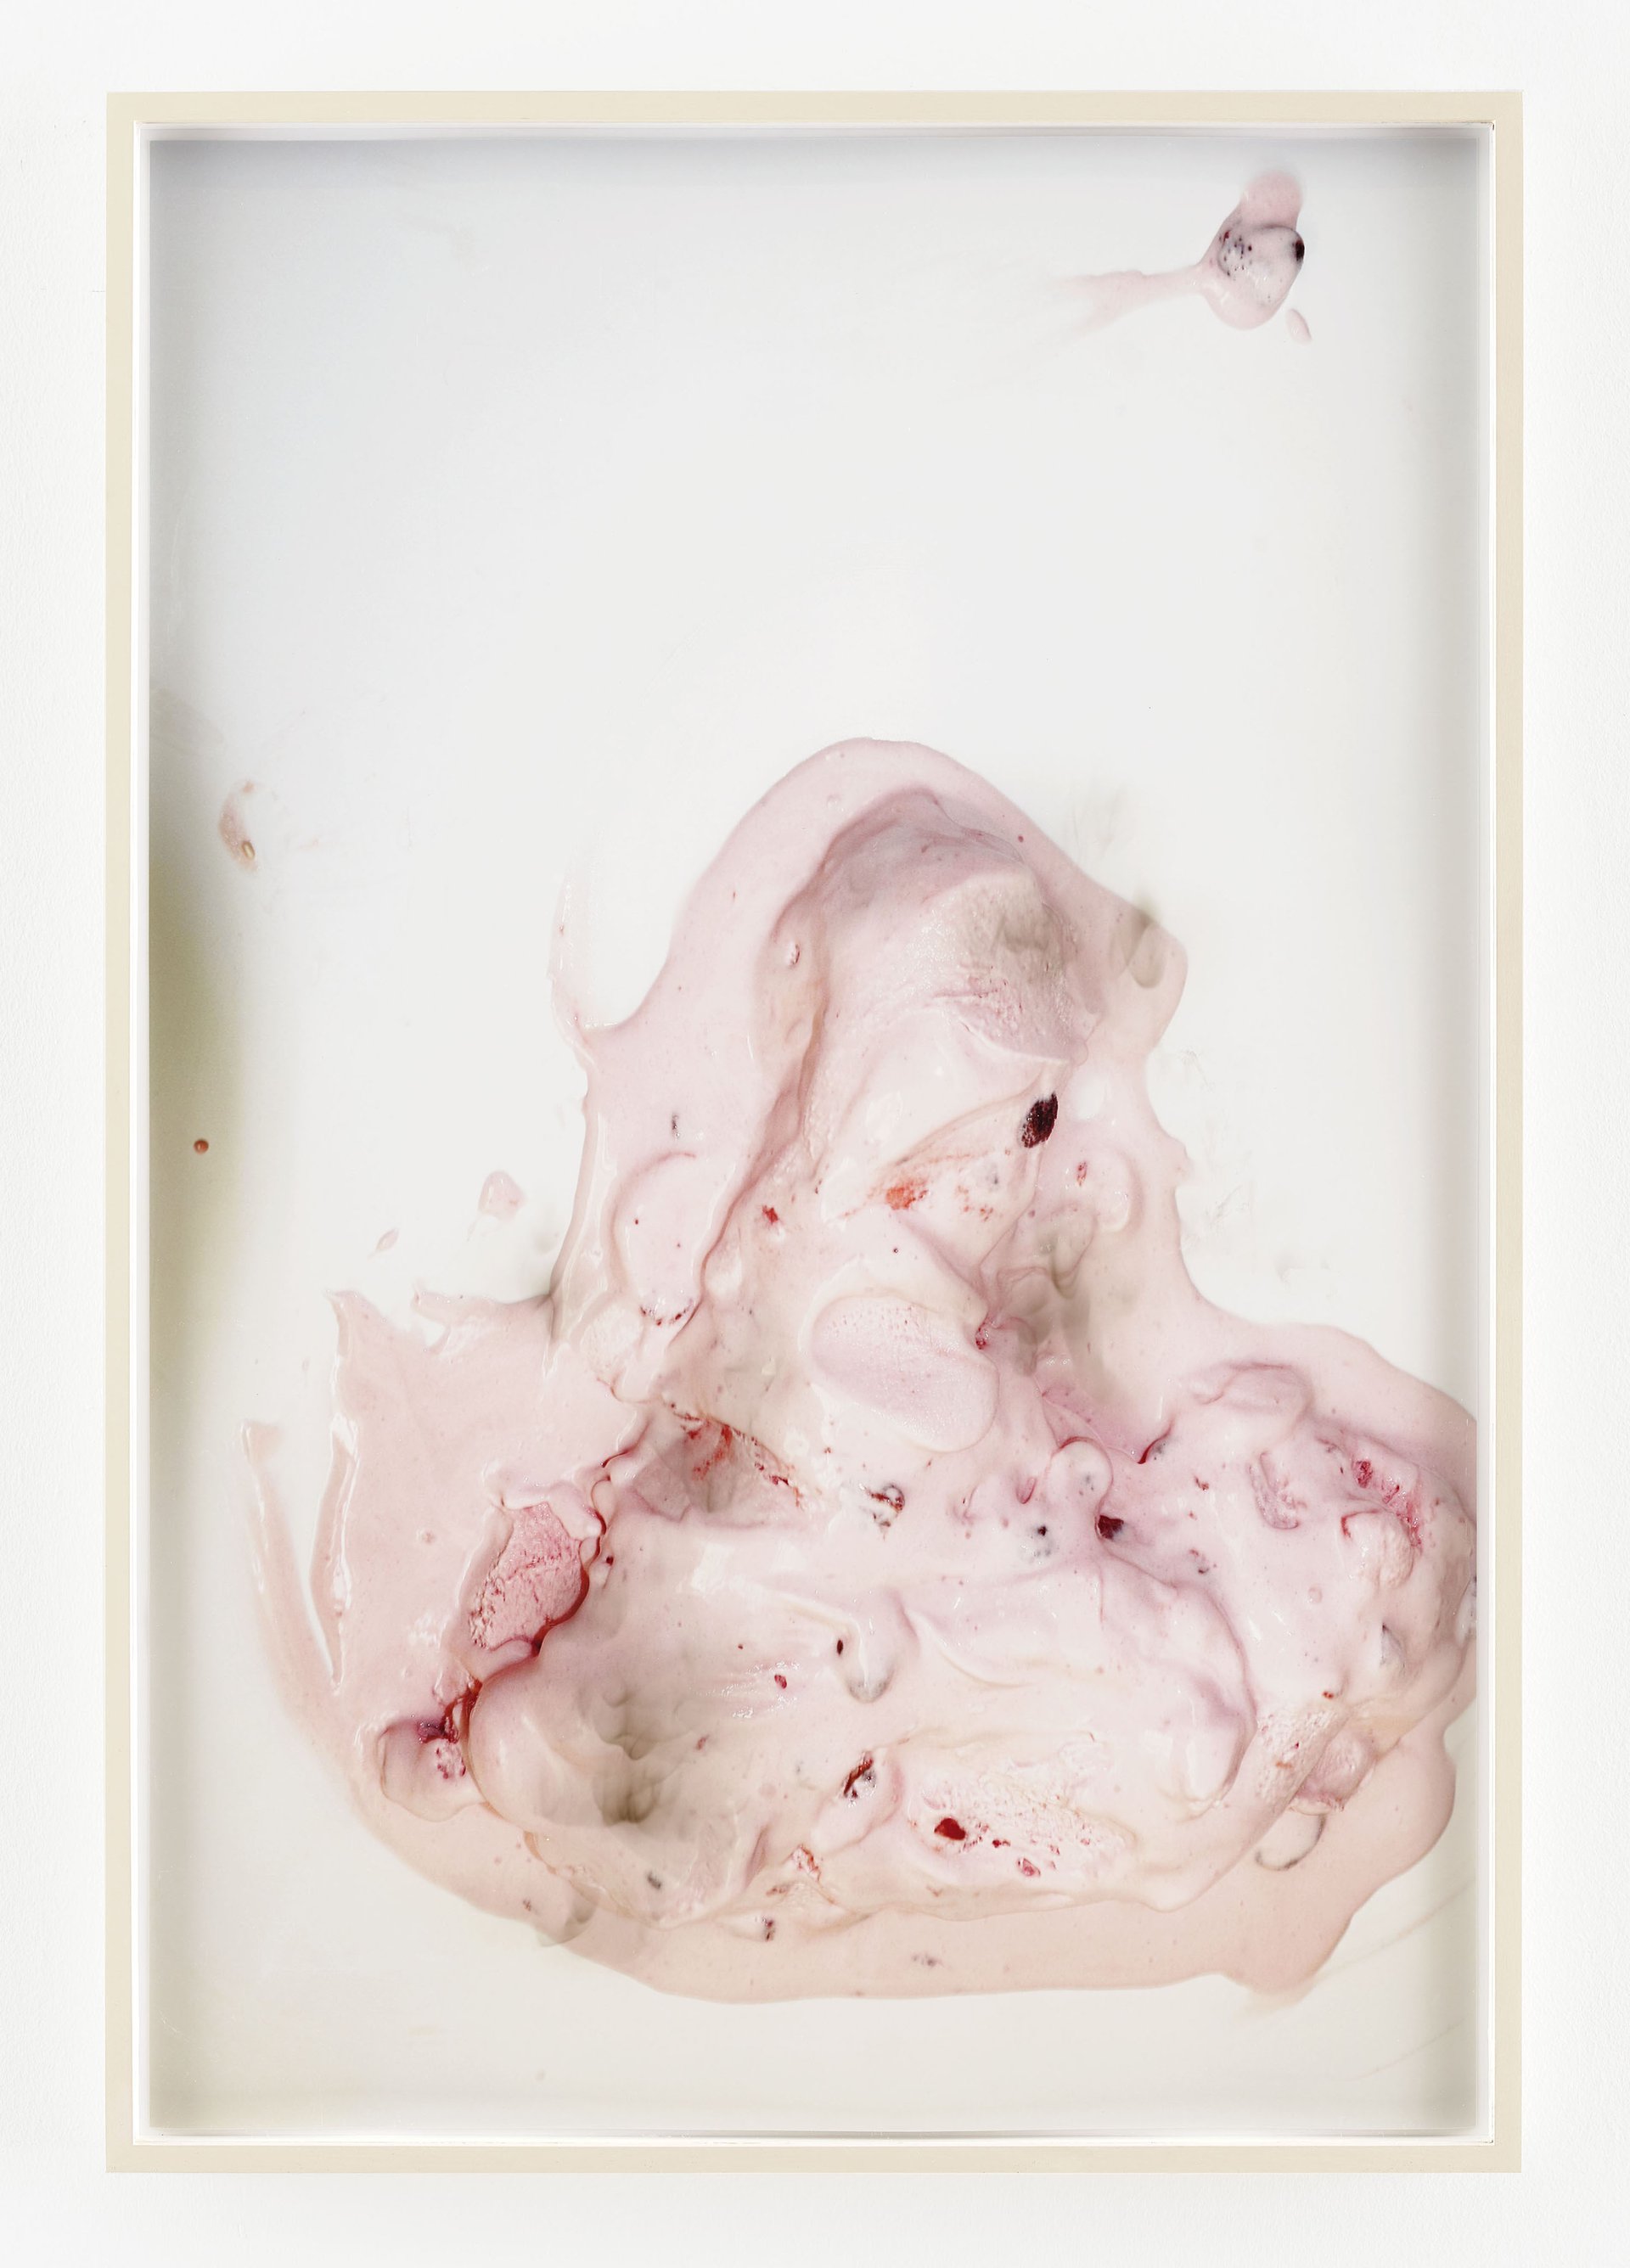 Lisa HolzerUnd ich hab schon wieder Hunger (Erdbeereis) / You make me very hungry (strawberry ice cream), 2018Pigment print on cotton paper, semigloss enamel on wood, soot on glass110 x 74.5 cm